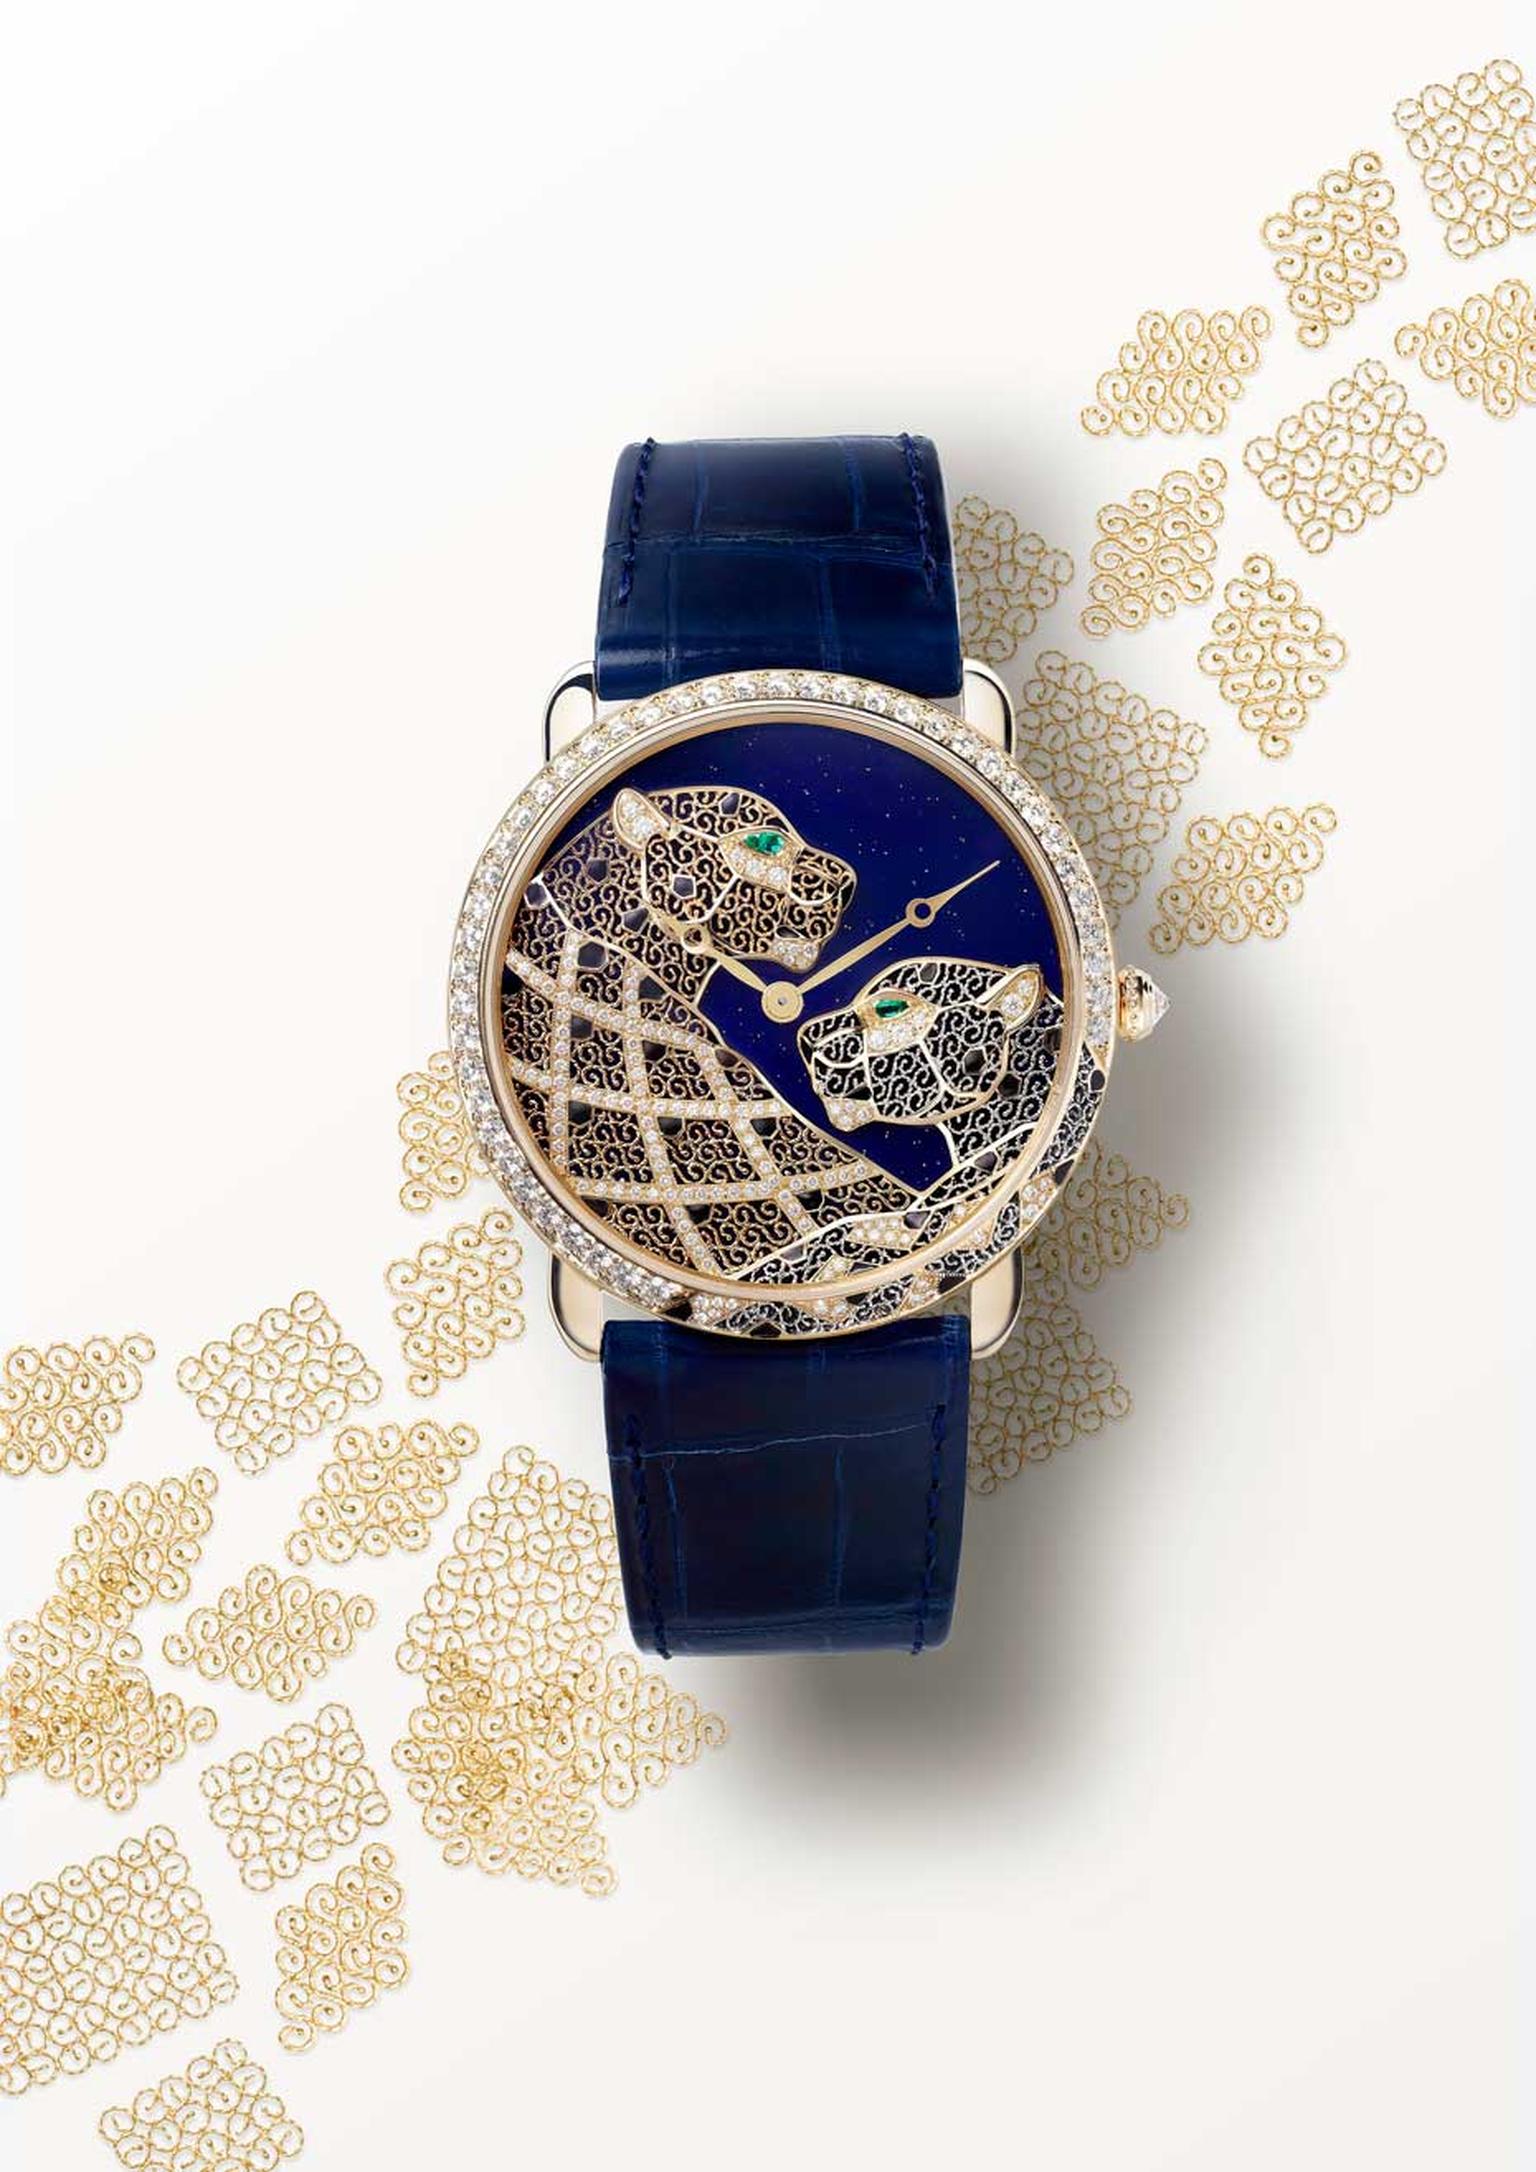 Ronde Louis Cartier XL watch in a 42mm yellow gold case was chosen to showcase the two majestic filigree panthers created from beaten gold and platinum micro-wires. (Nils Hermann@Cartier)